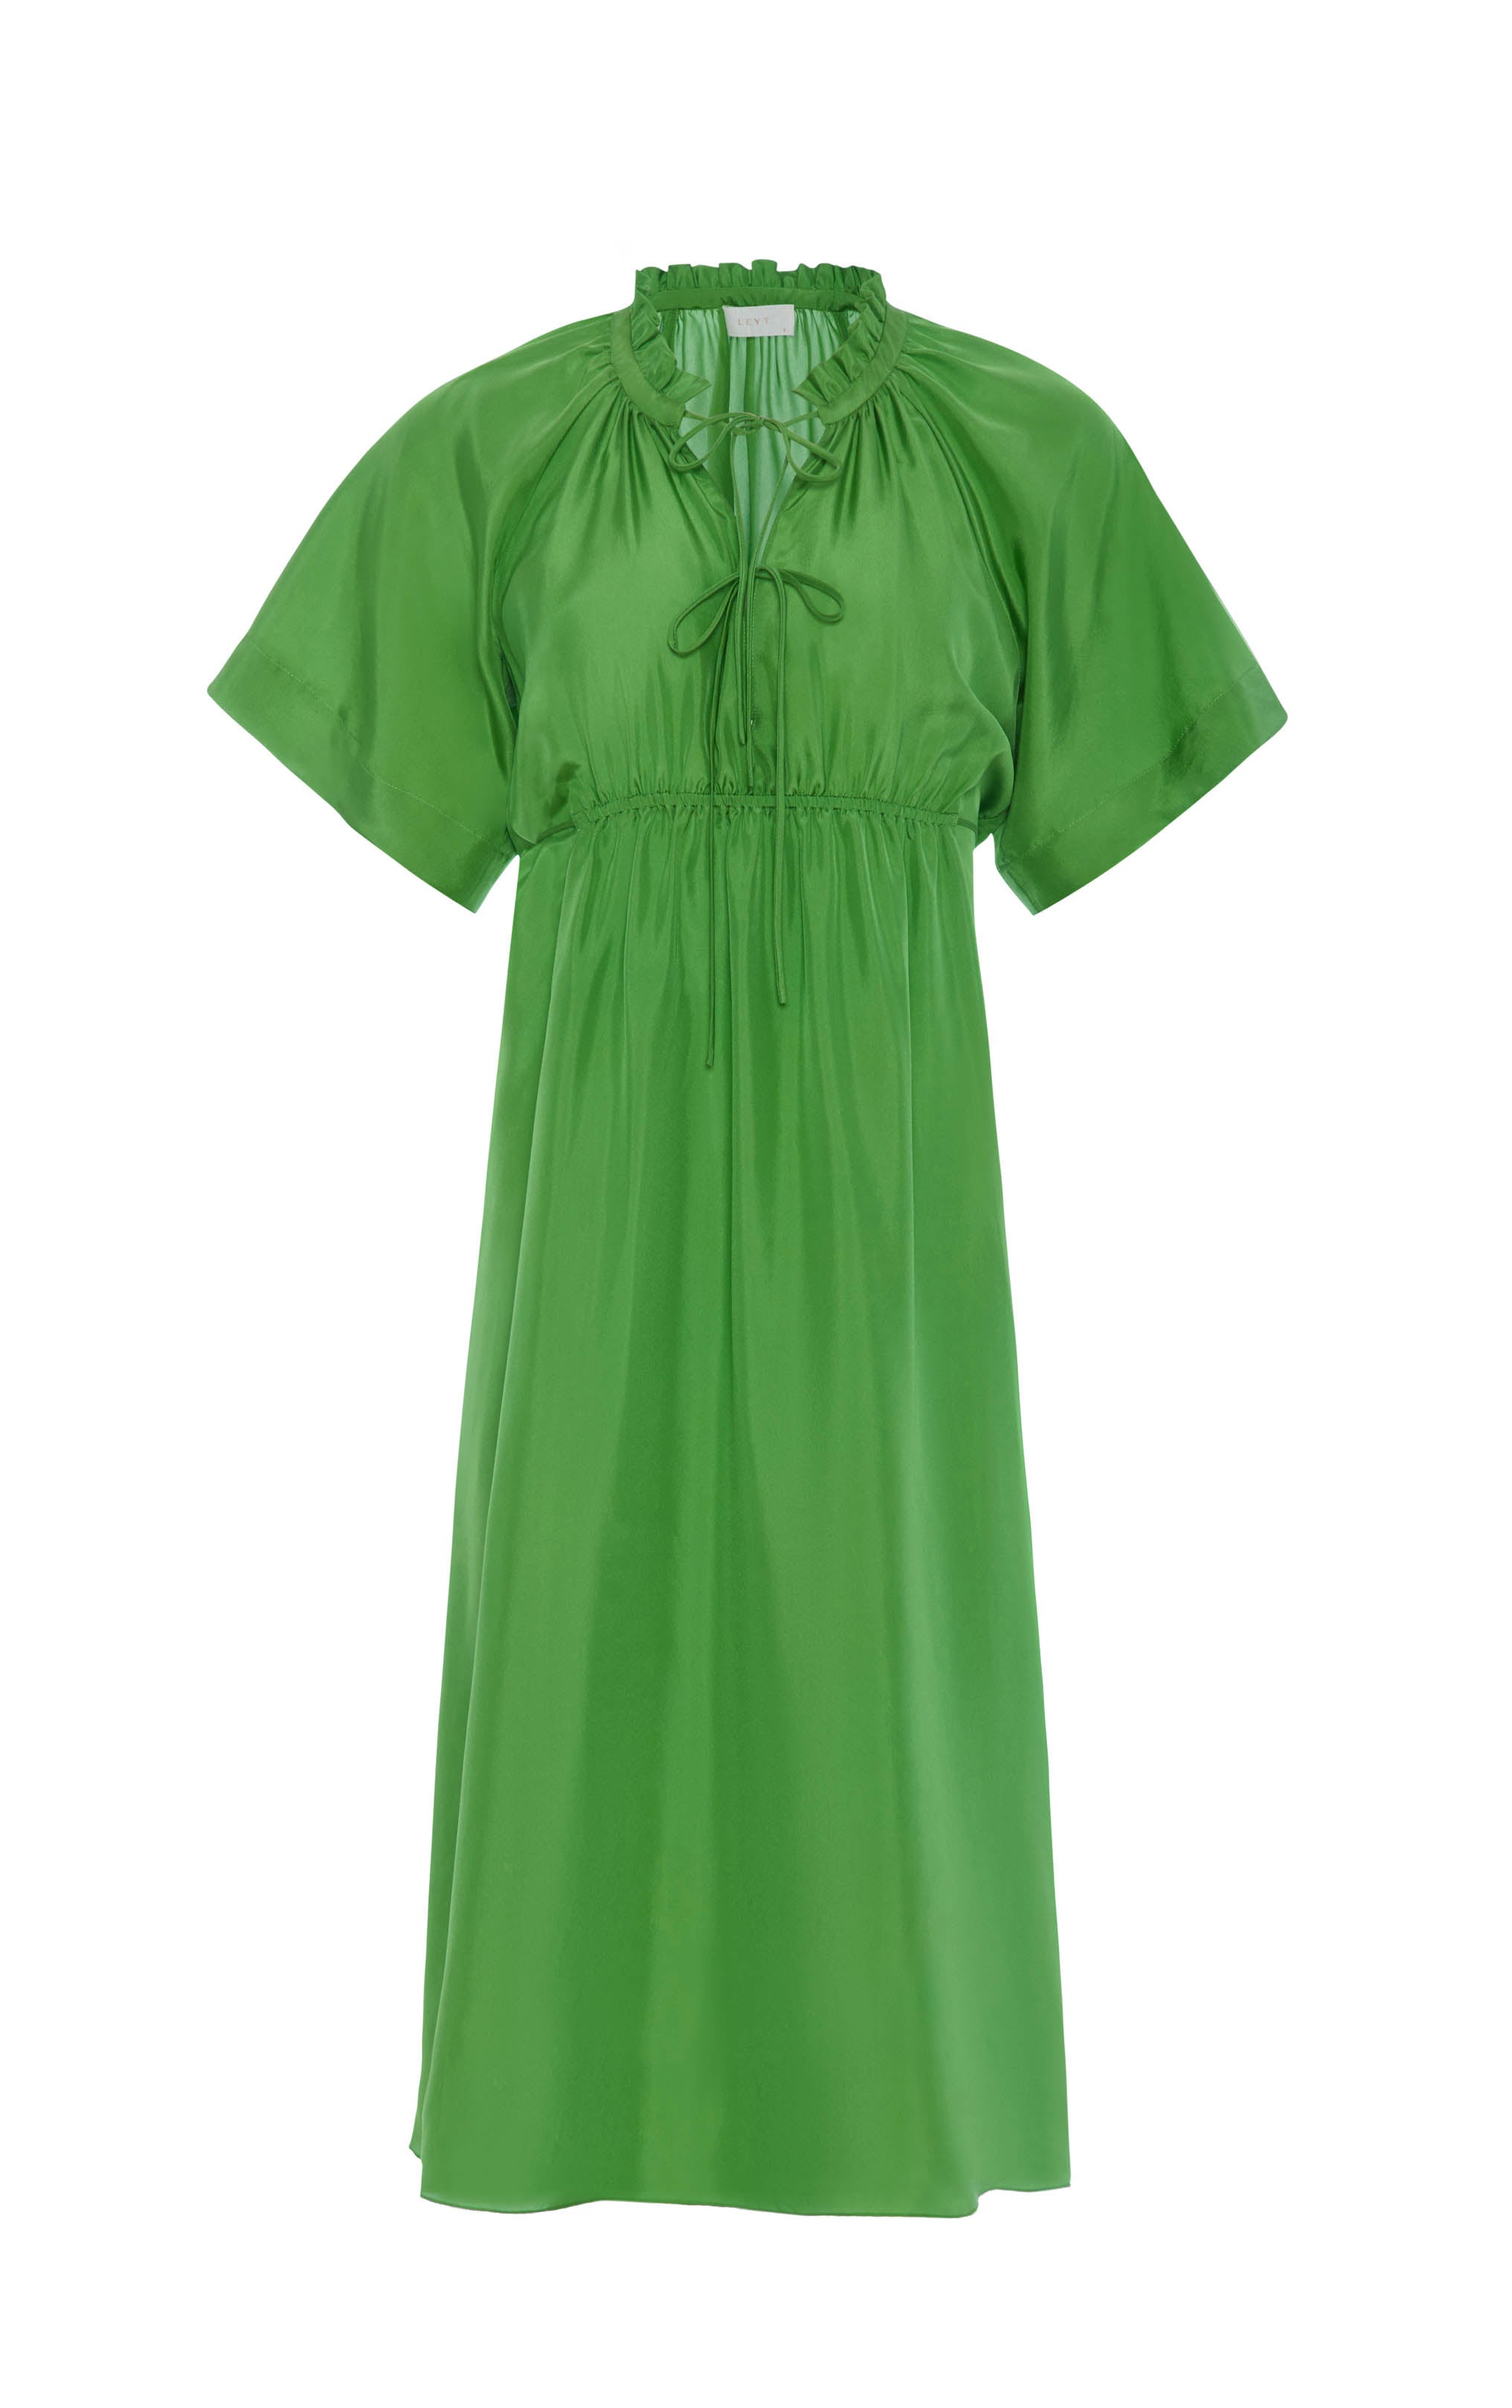 front view of green short sleeved silk dress with ruffled neck trim and rusched neck